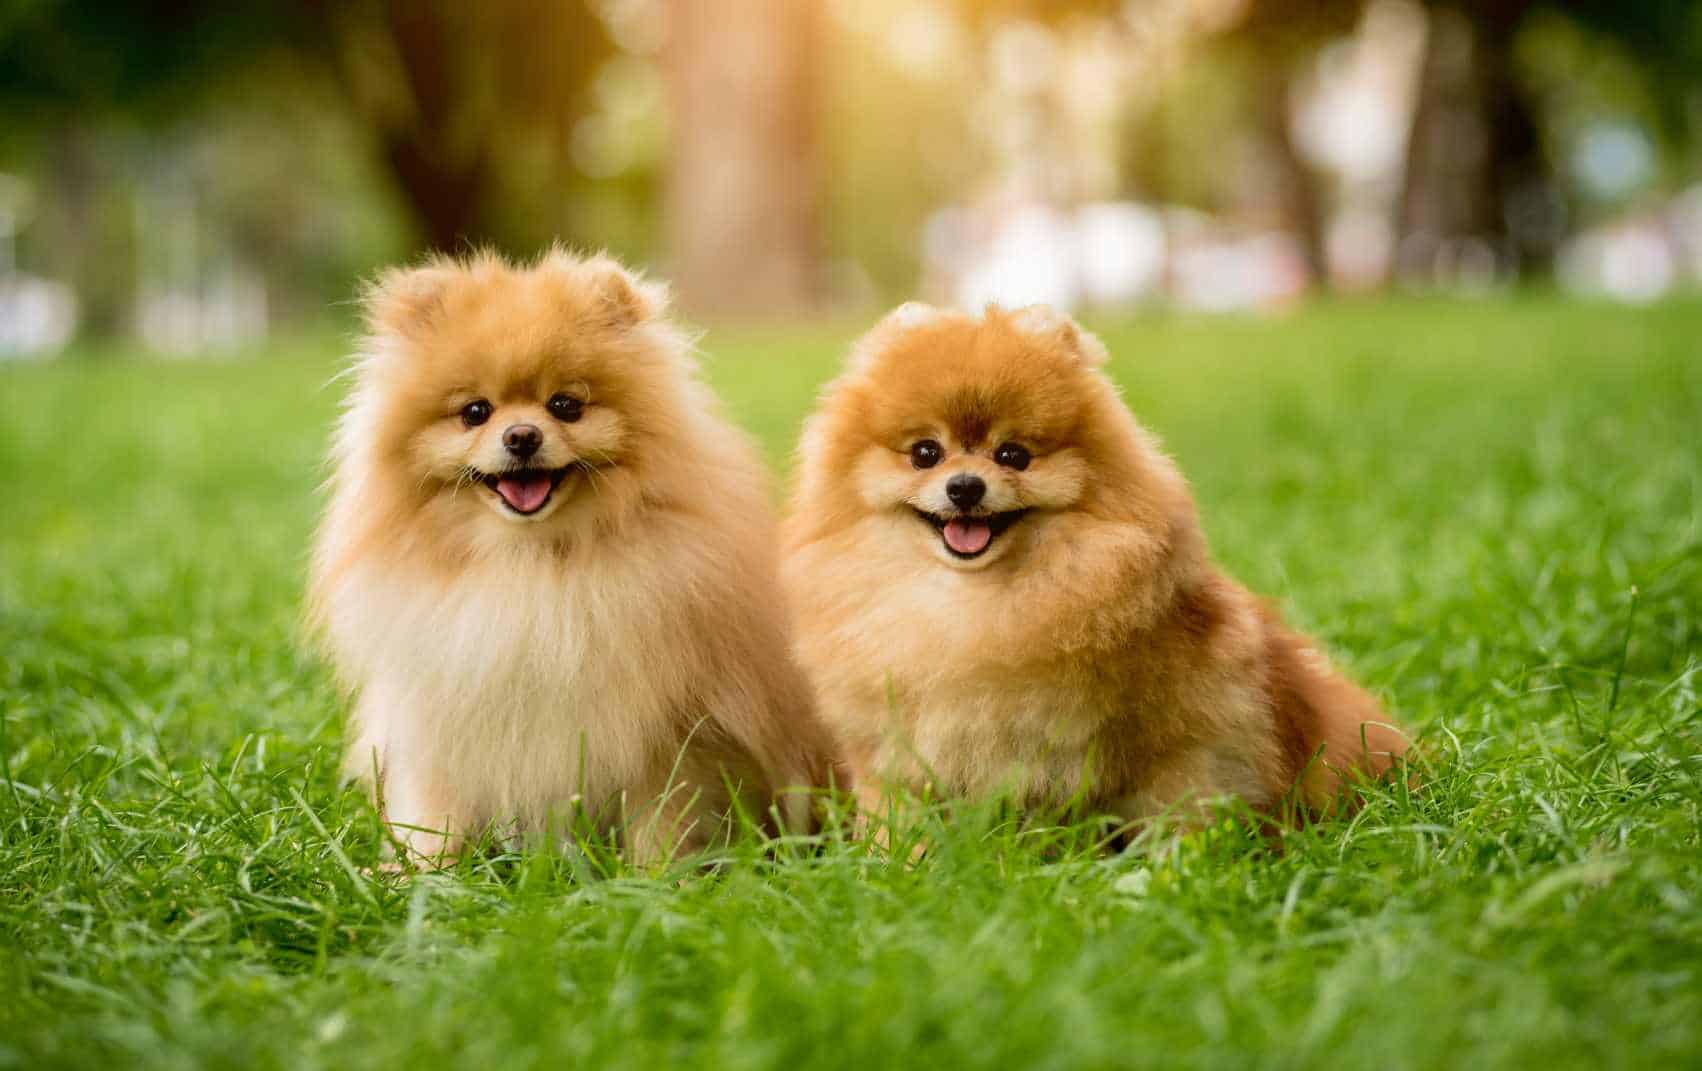 are pomeranians good guard dogs